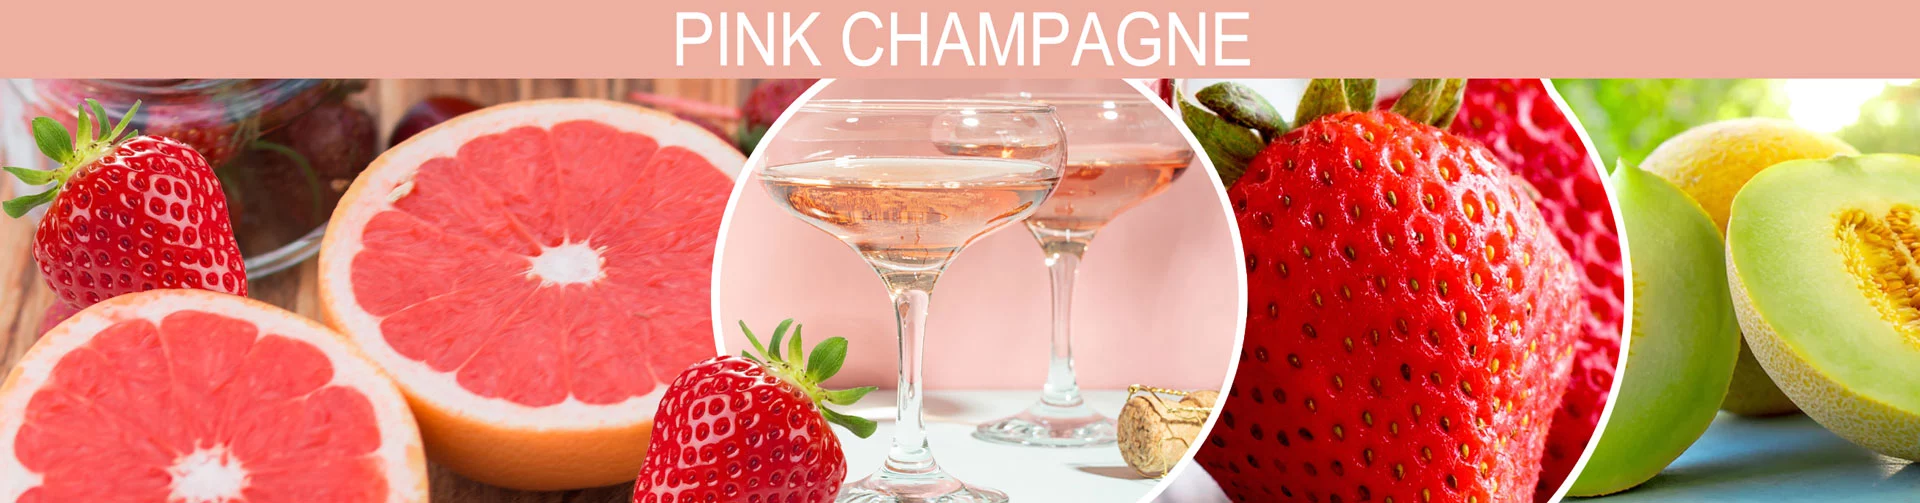 Banner image of Pink Champagne, strawberries and grape fruit.